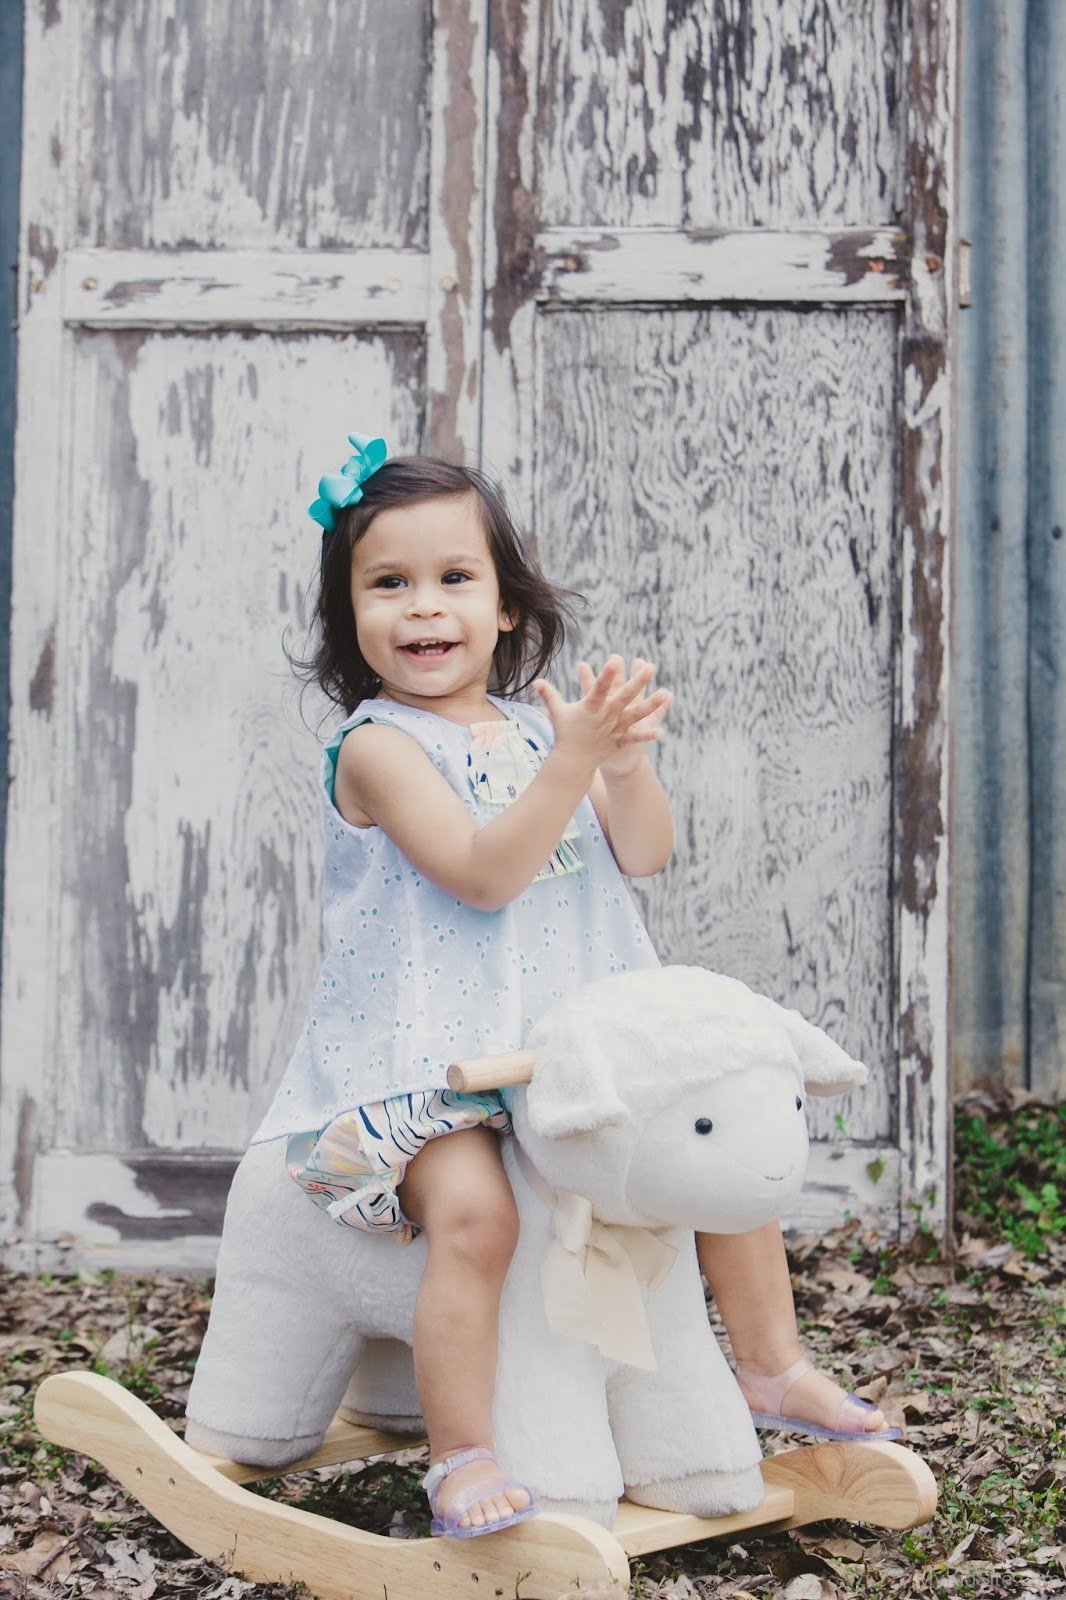 Cute Baby Girl On Toy Horse